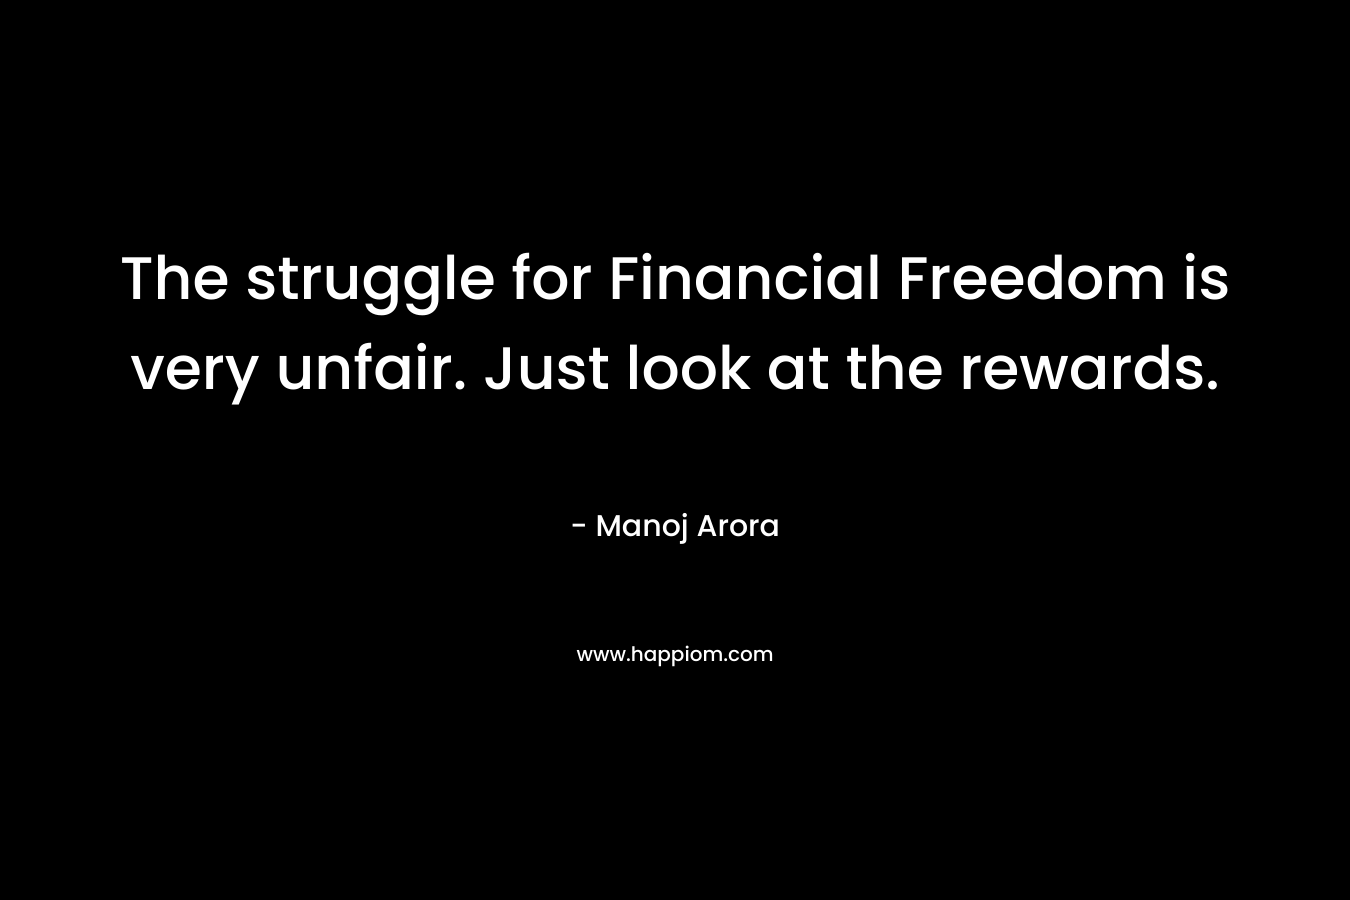 The struggle for Financial Freedom is very unfair. Just look at the rewards.